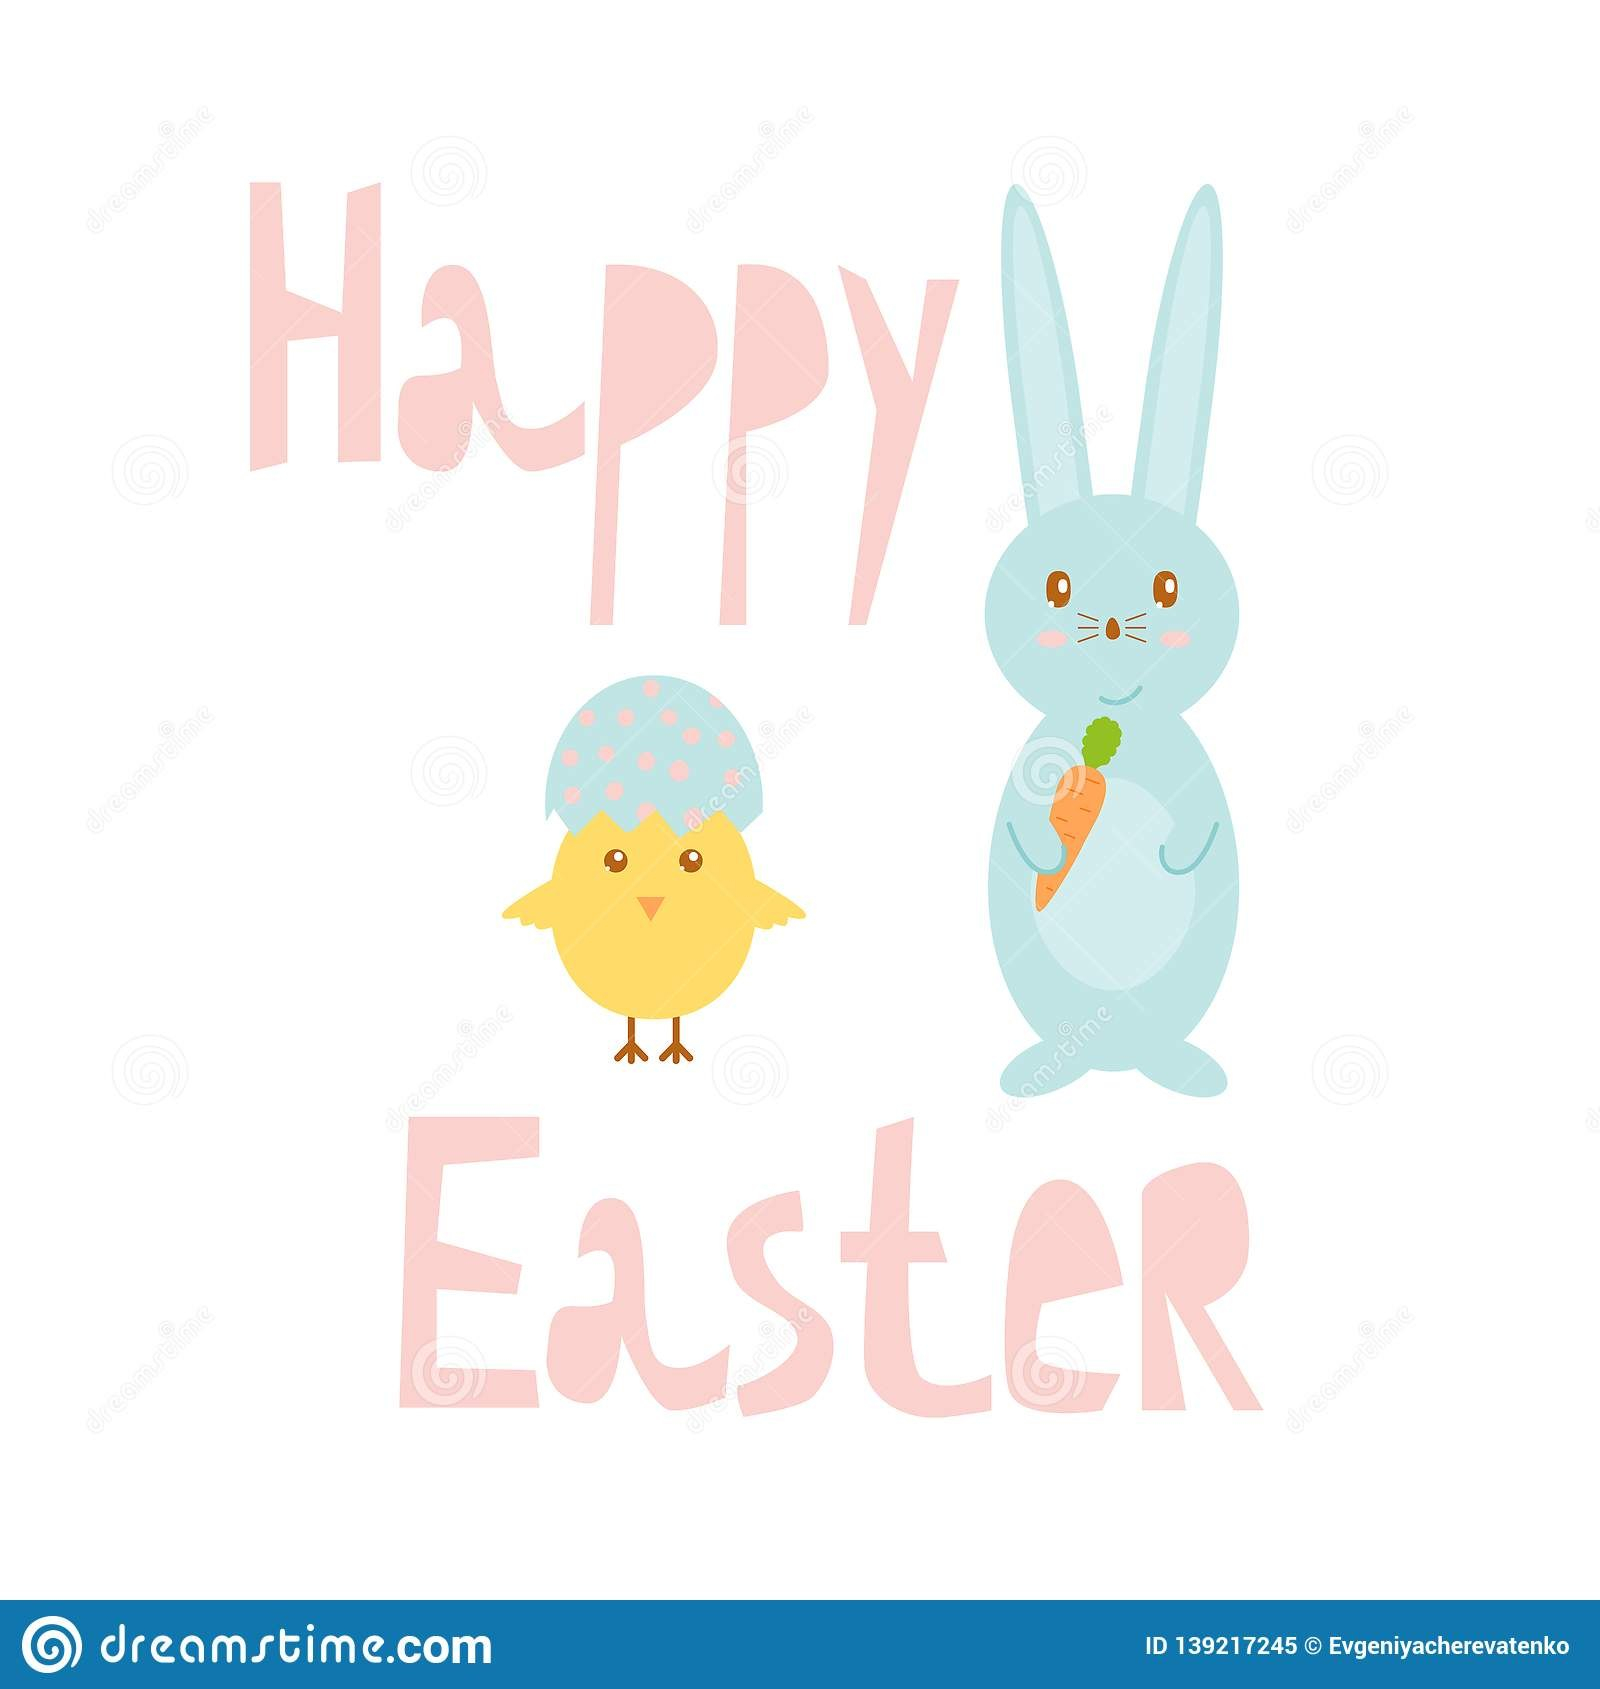 Happy Easter Greeting Card Template With Bunny And Chick Design intended for Easter Chick Card Template